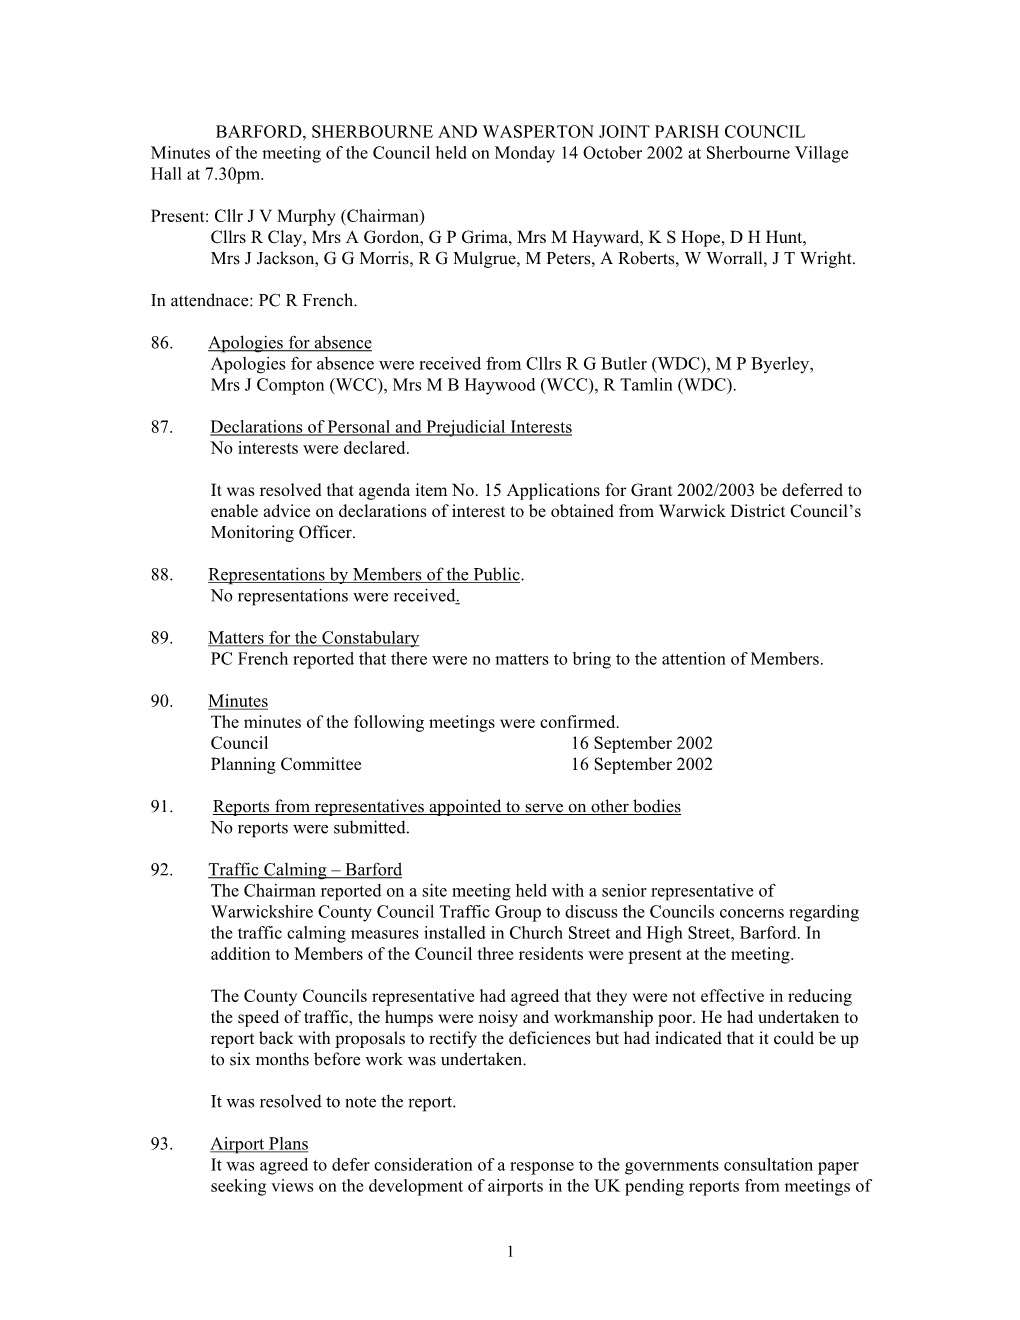 BARFORD, SHERBOURNE and WASPERTON JOINT PARISH COUNCIL Minutes of the Meeting of the Council Held on Monday 14 October 2002 at Sherbourne Village Hall at 7.30Pm